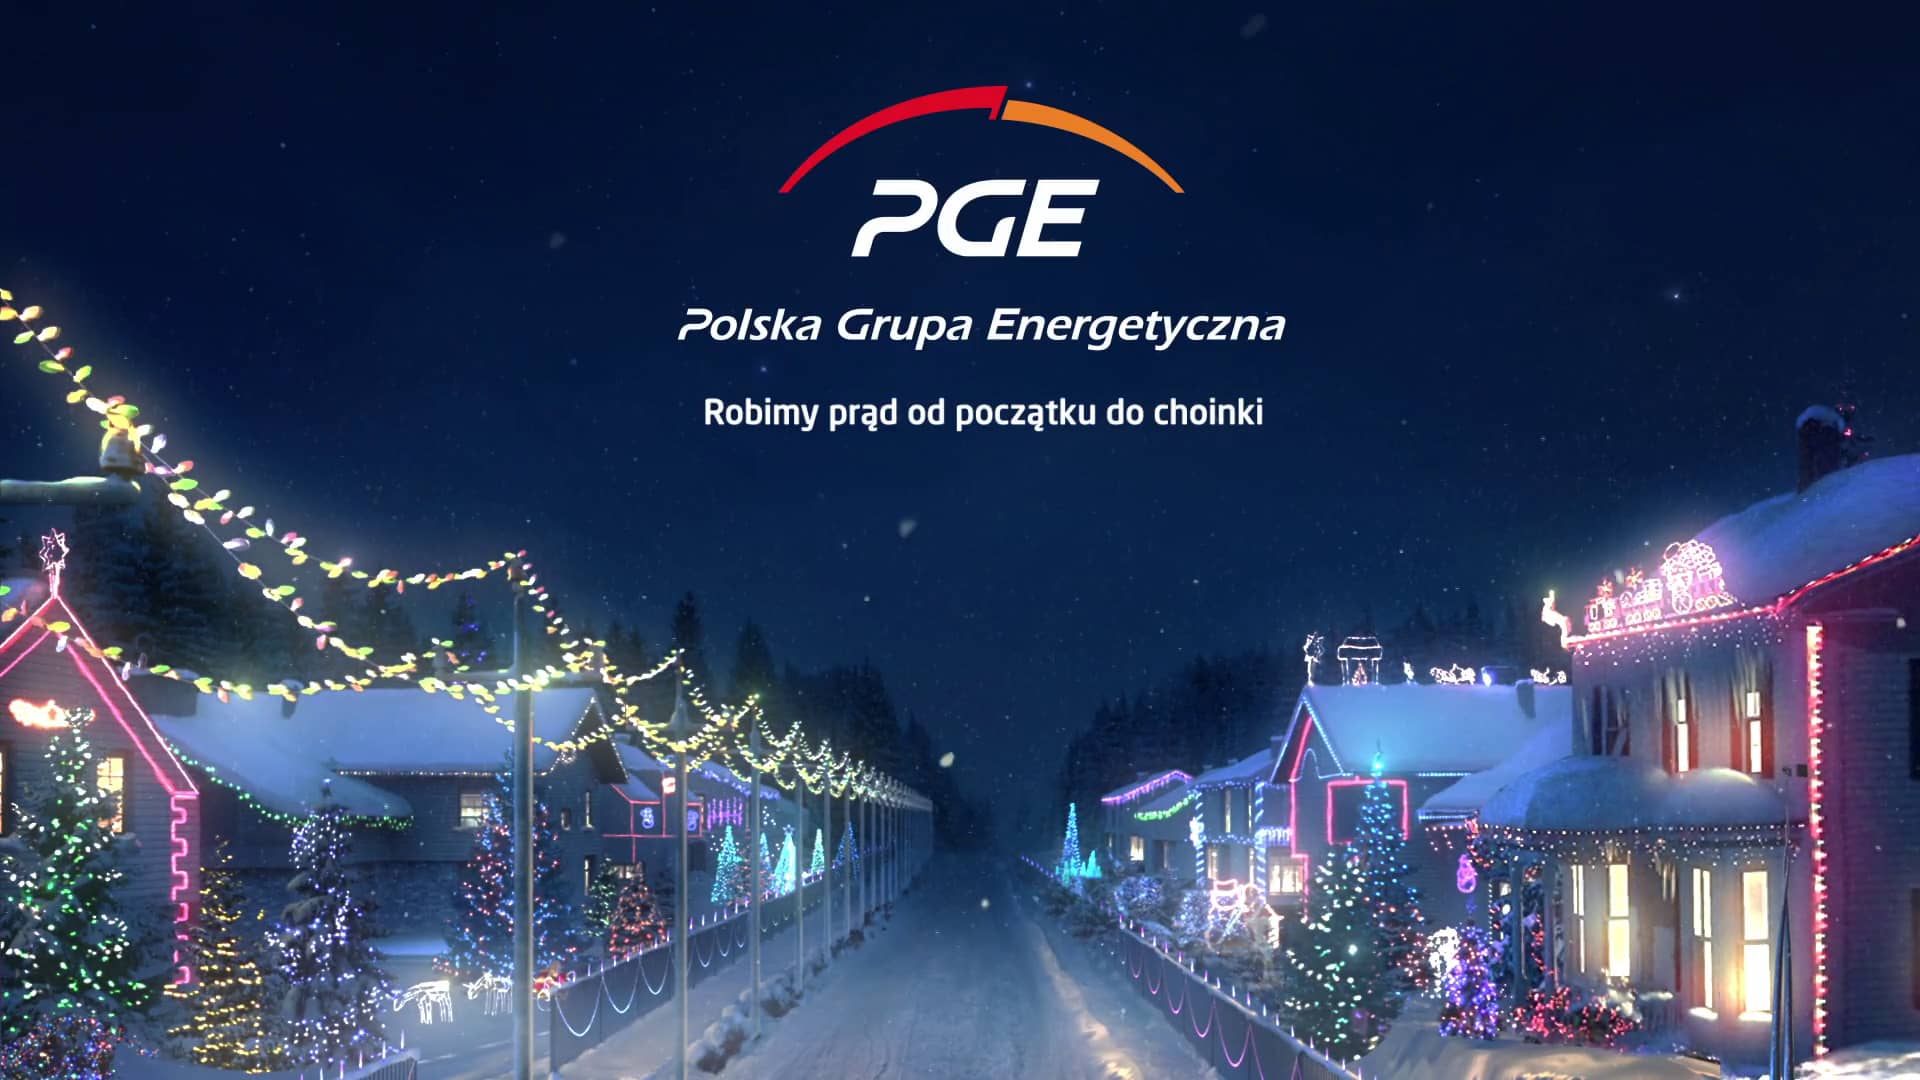 pge-commercial-on-vimeo